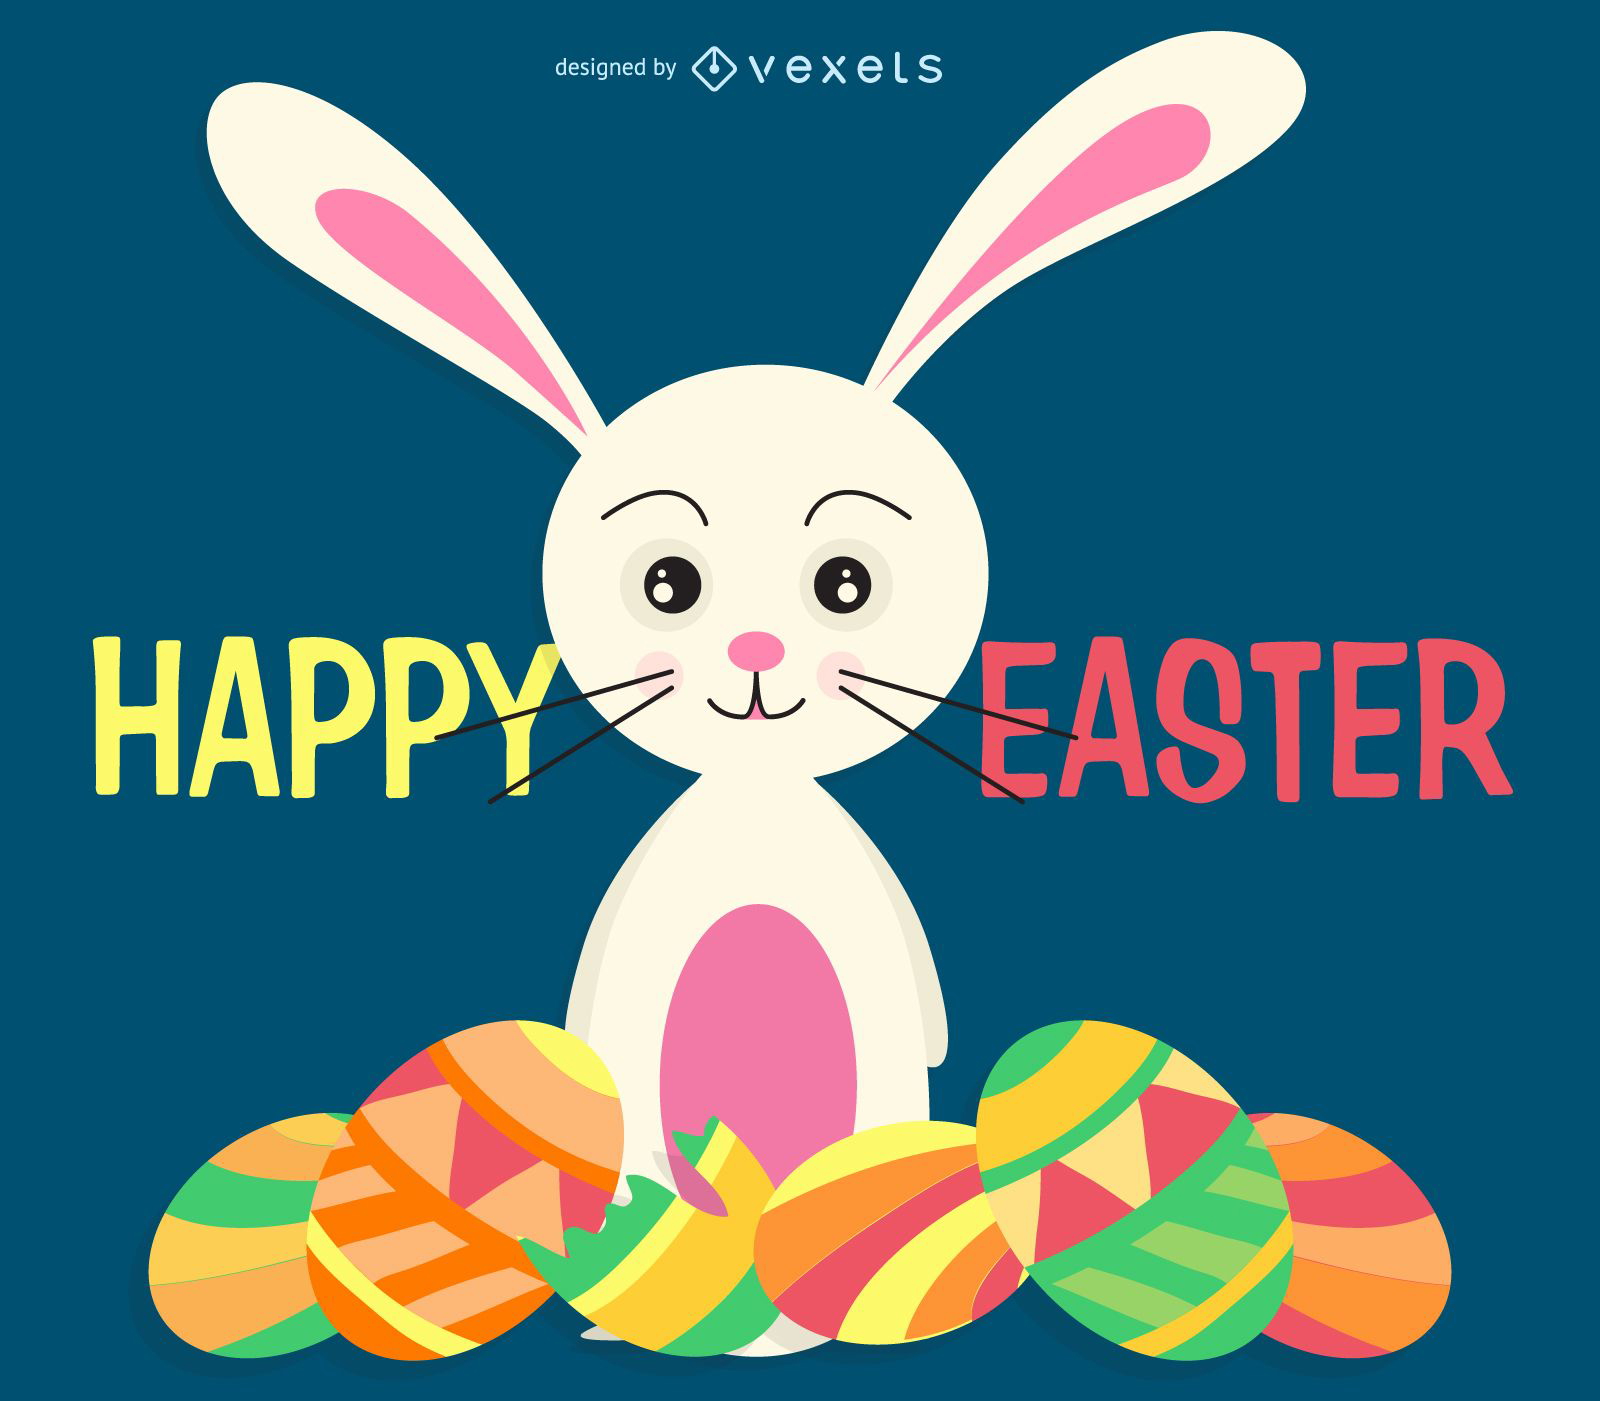 Easter Illustration With A Bunny And Lots Of Eggs Vector Download